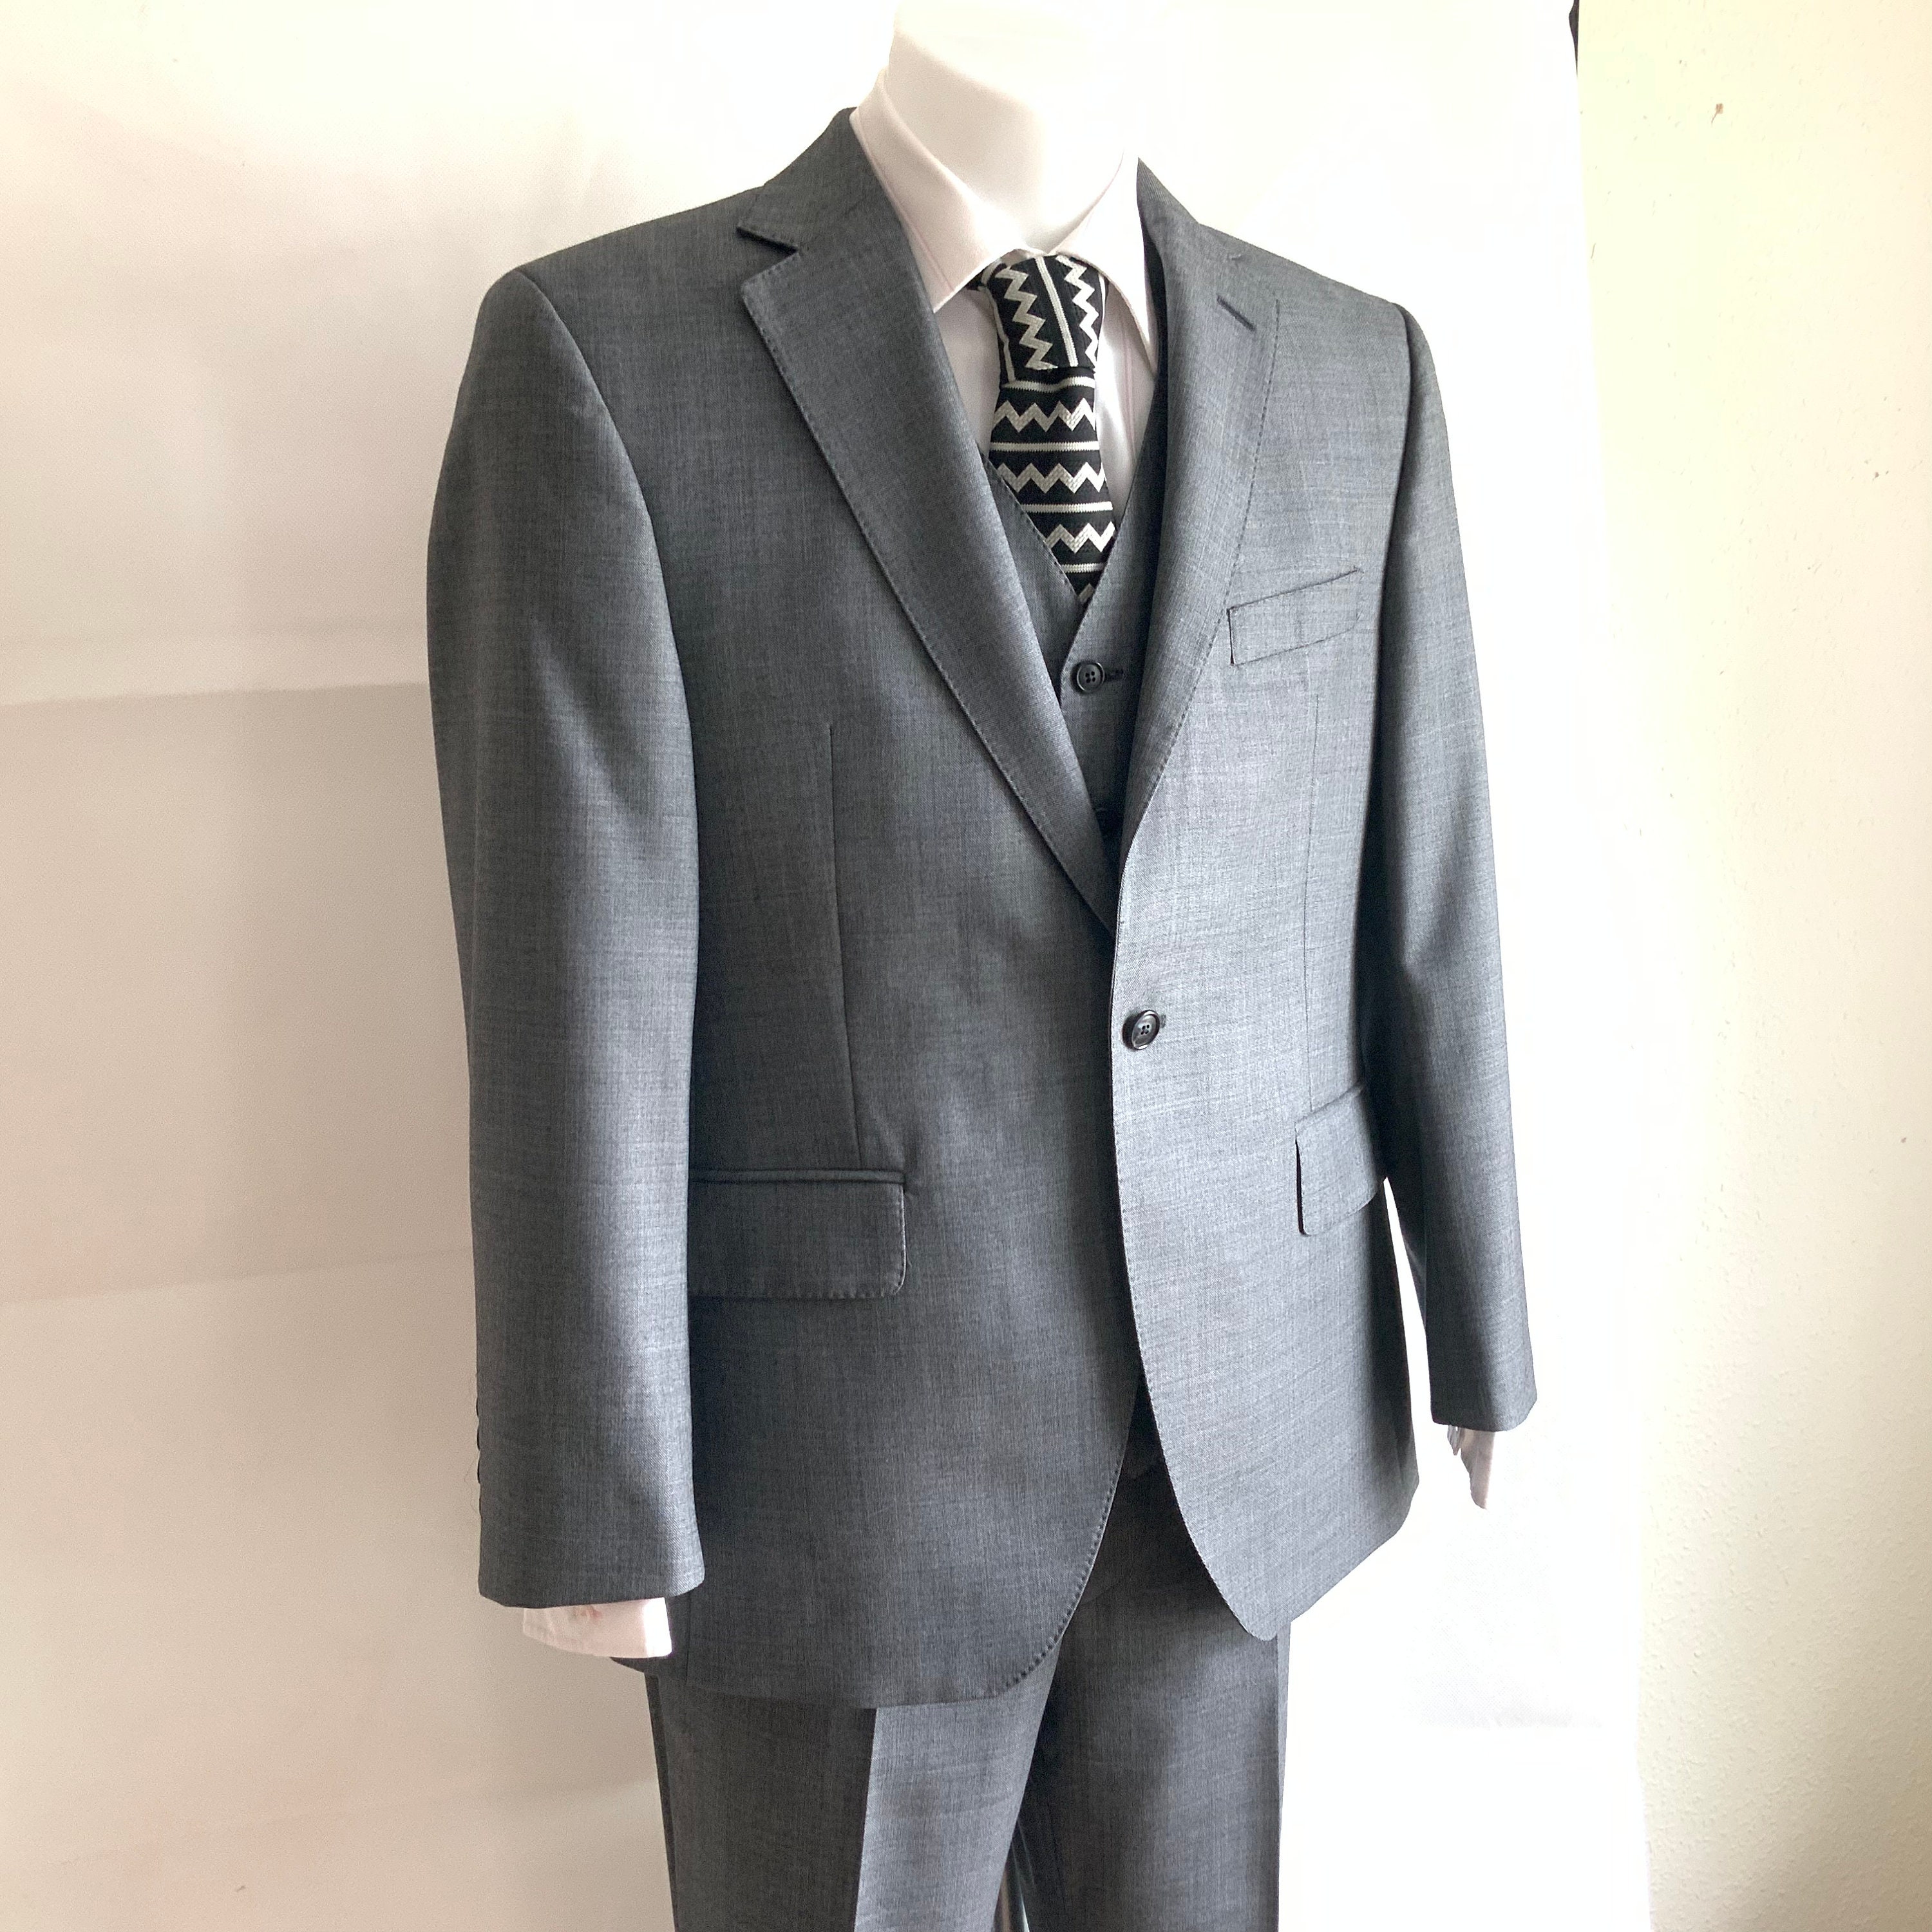 Austin Reed 40S Three Piece Grey Wool Suit Woven in Italy. | Etsy UK